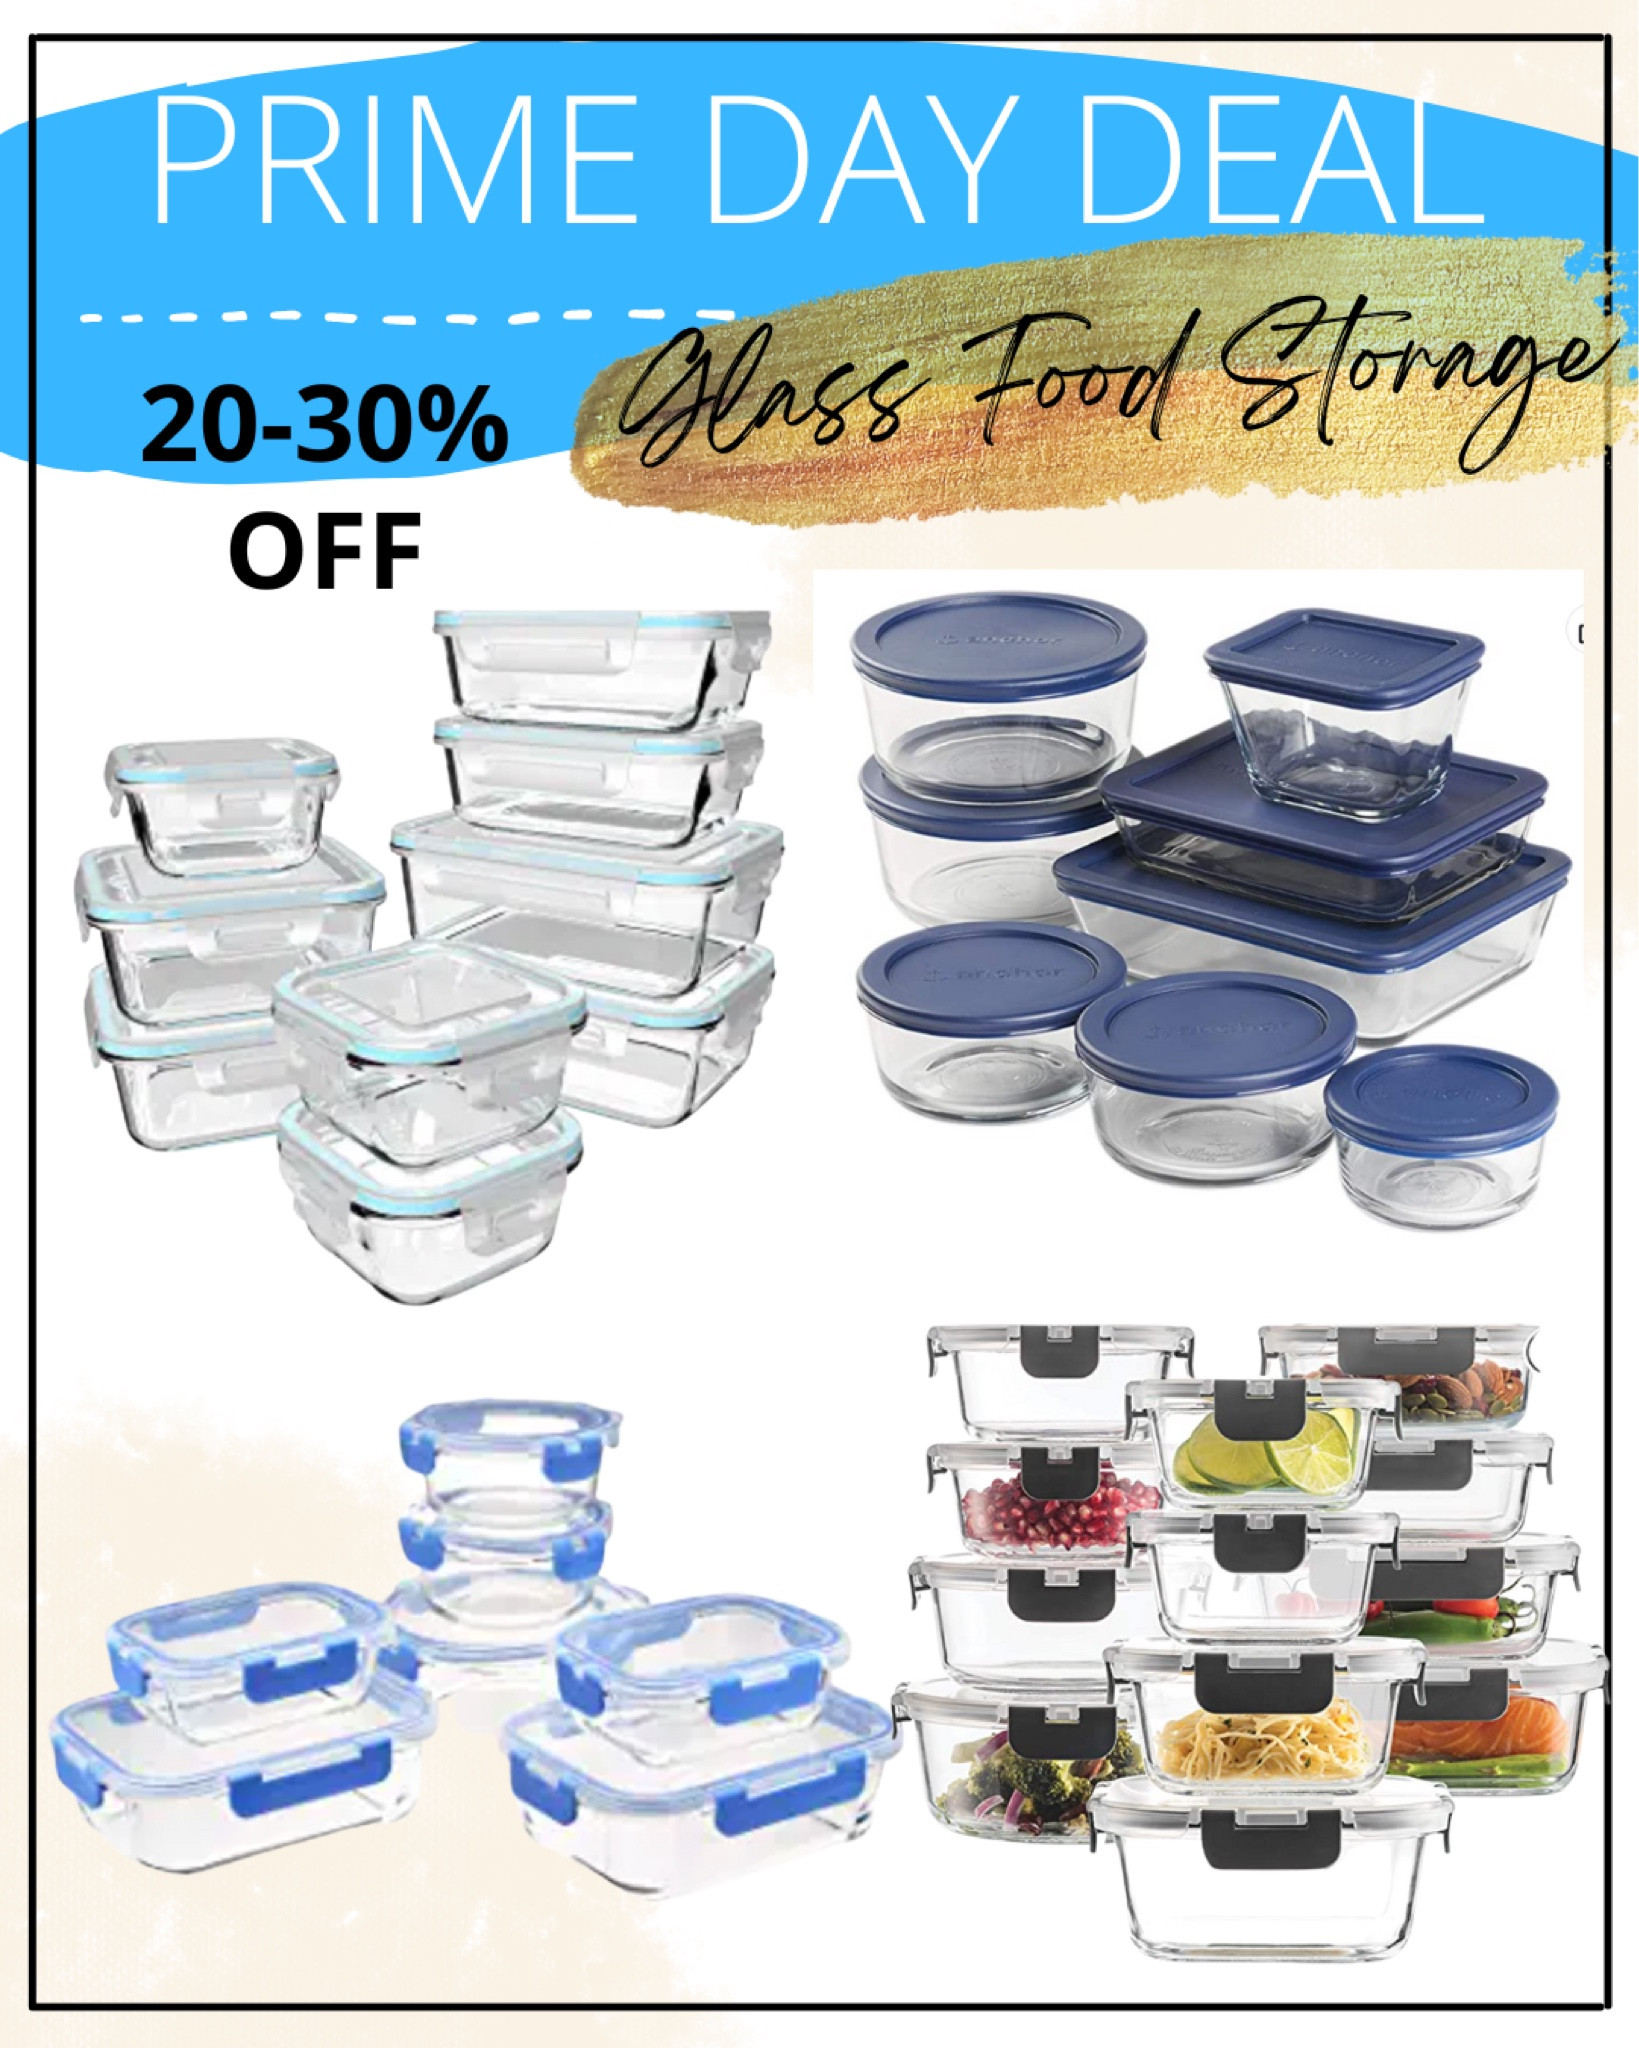 24-Piece Superior Glass Food Storage Containers Set